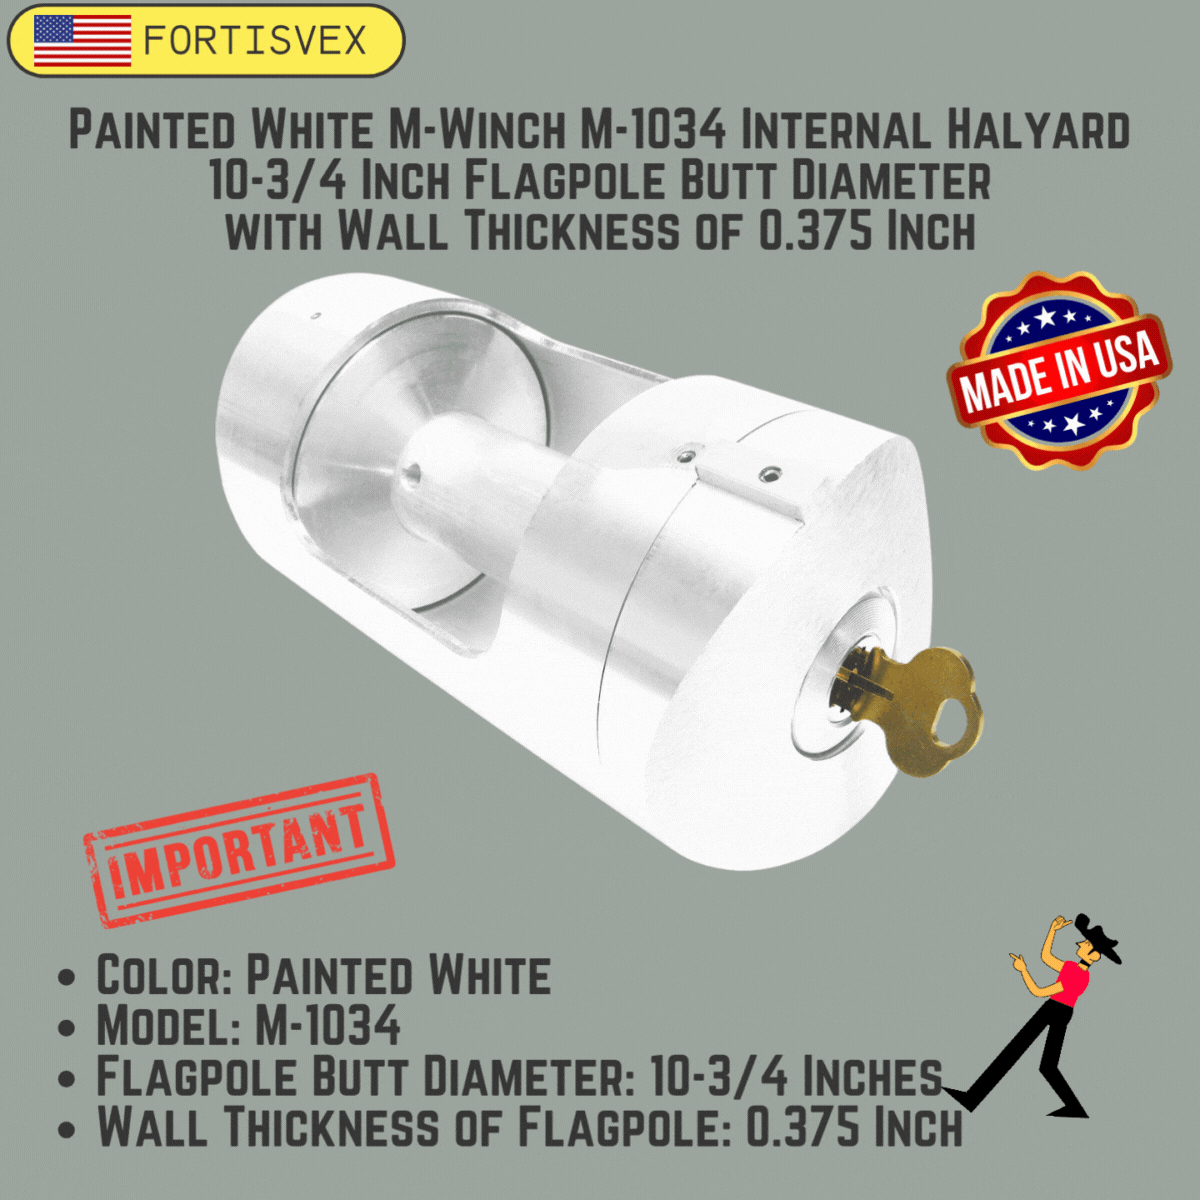 White M-Winch M-1034 Internal Halyard 10-3/4 Inch Flagpole Butt Diameter with Wall Thickness of 0.375 Inch 360032